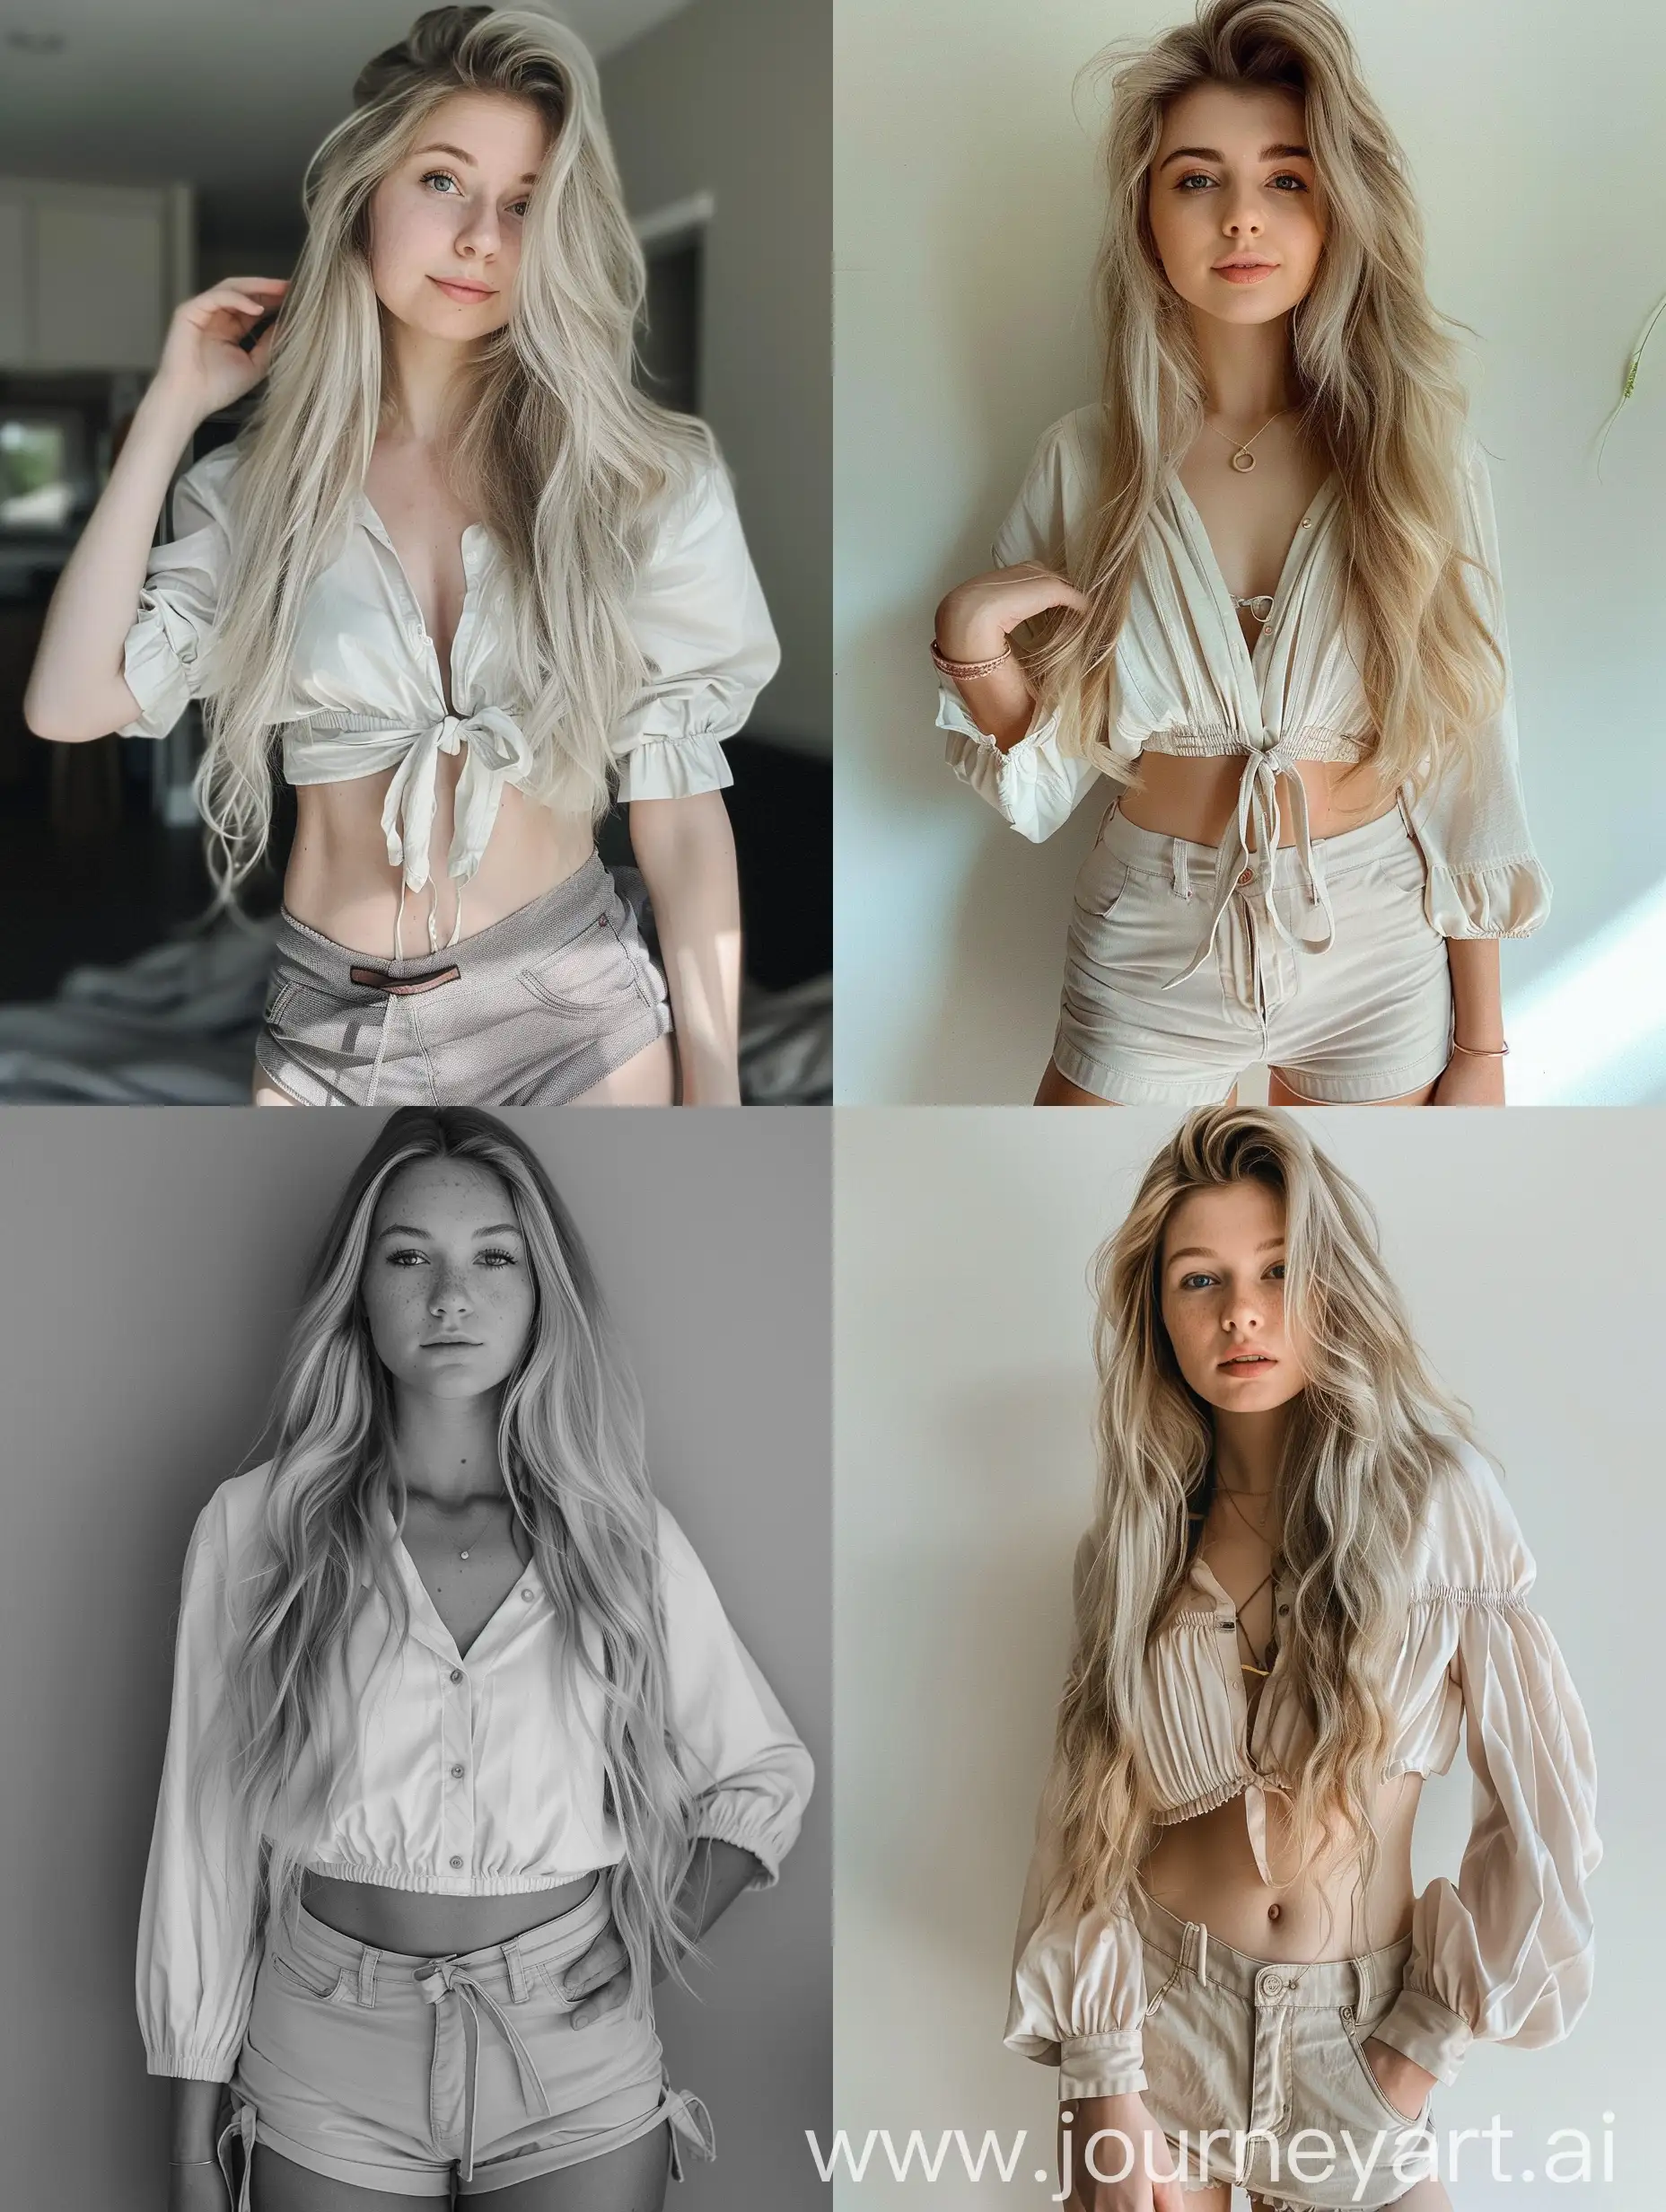  1 girl, long blond hair, 22 years old, influencer, beauty,    no filters, iphone photo, natural,  curves, fitness, shorts, blouse